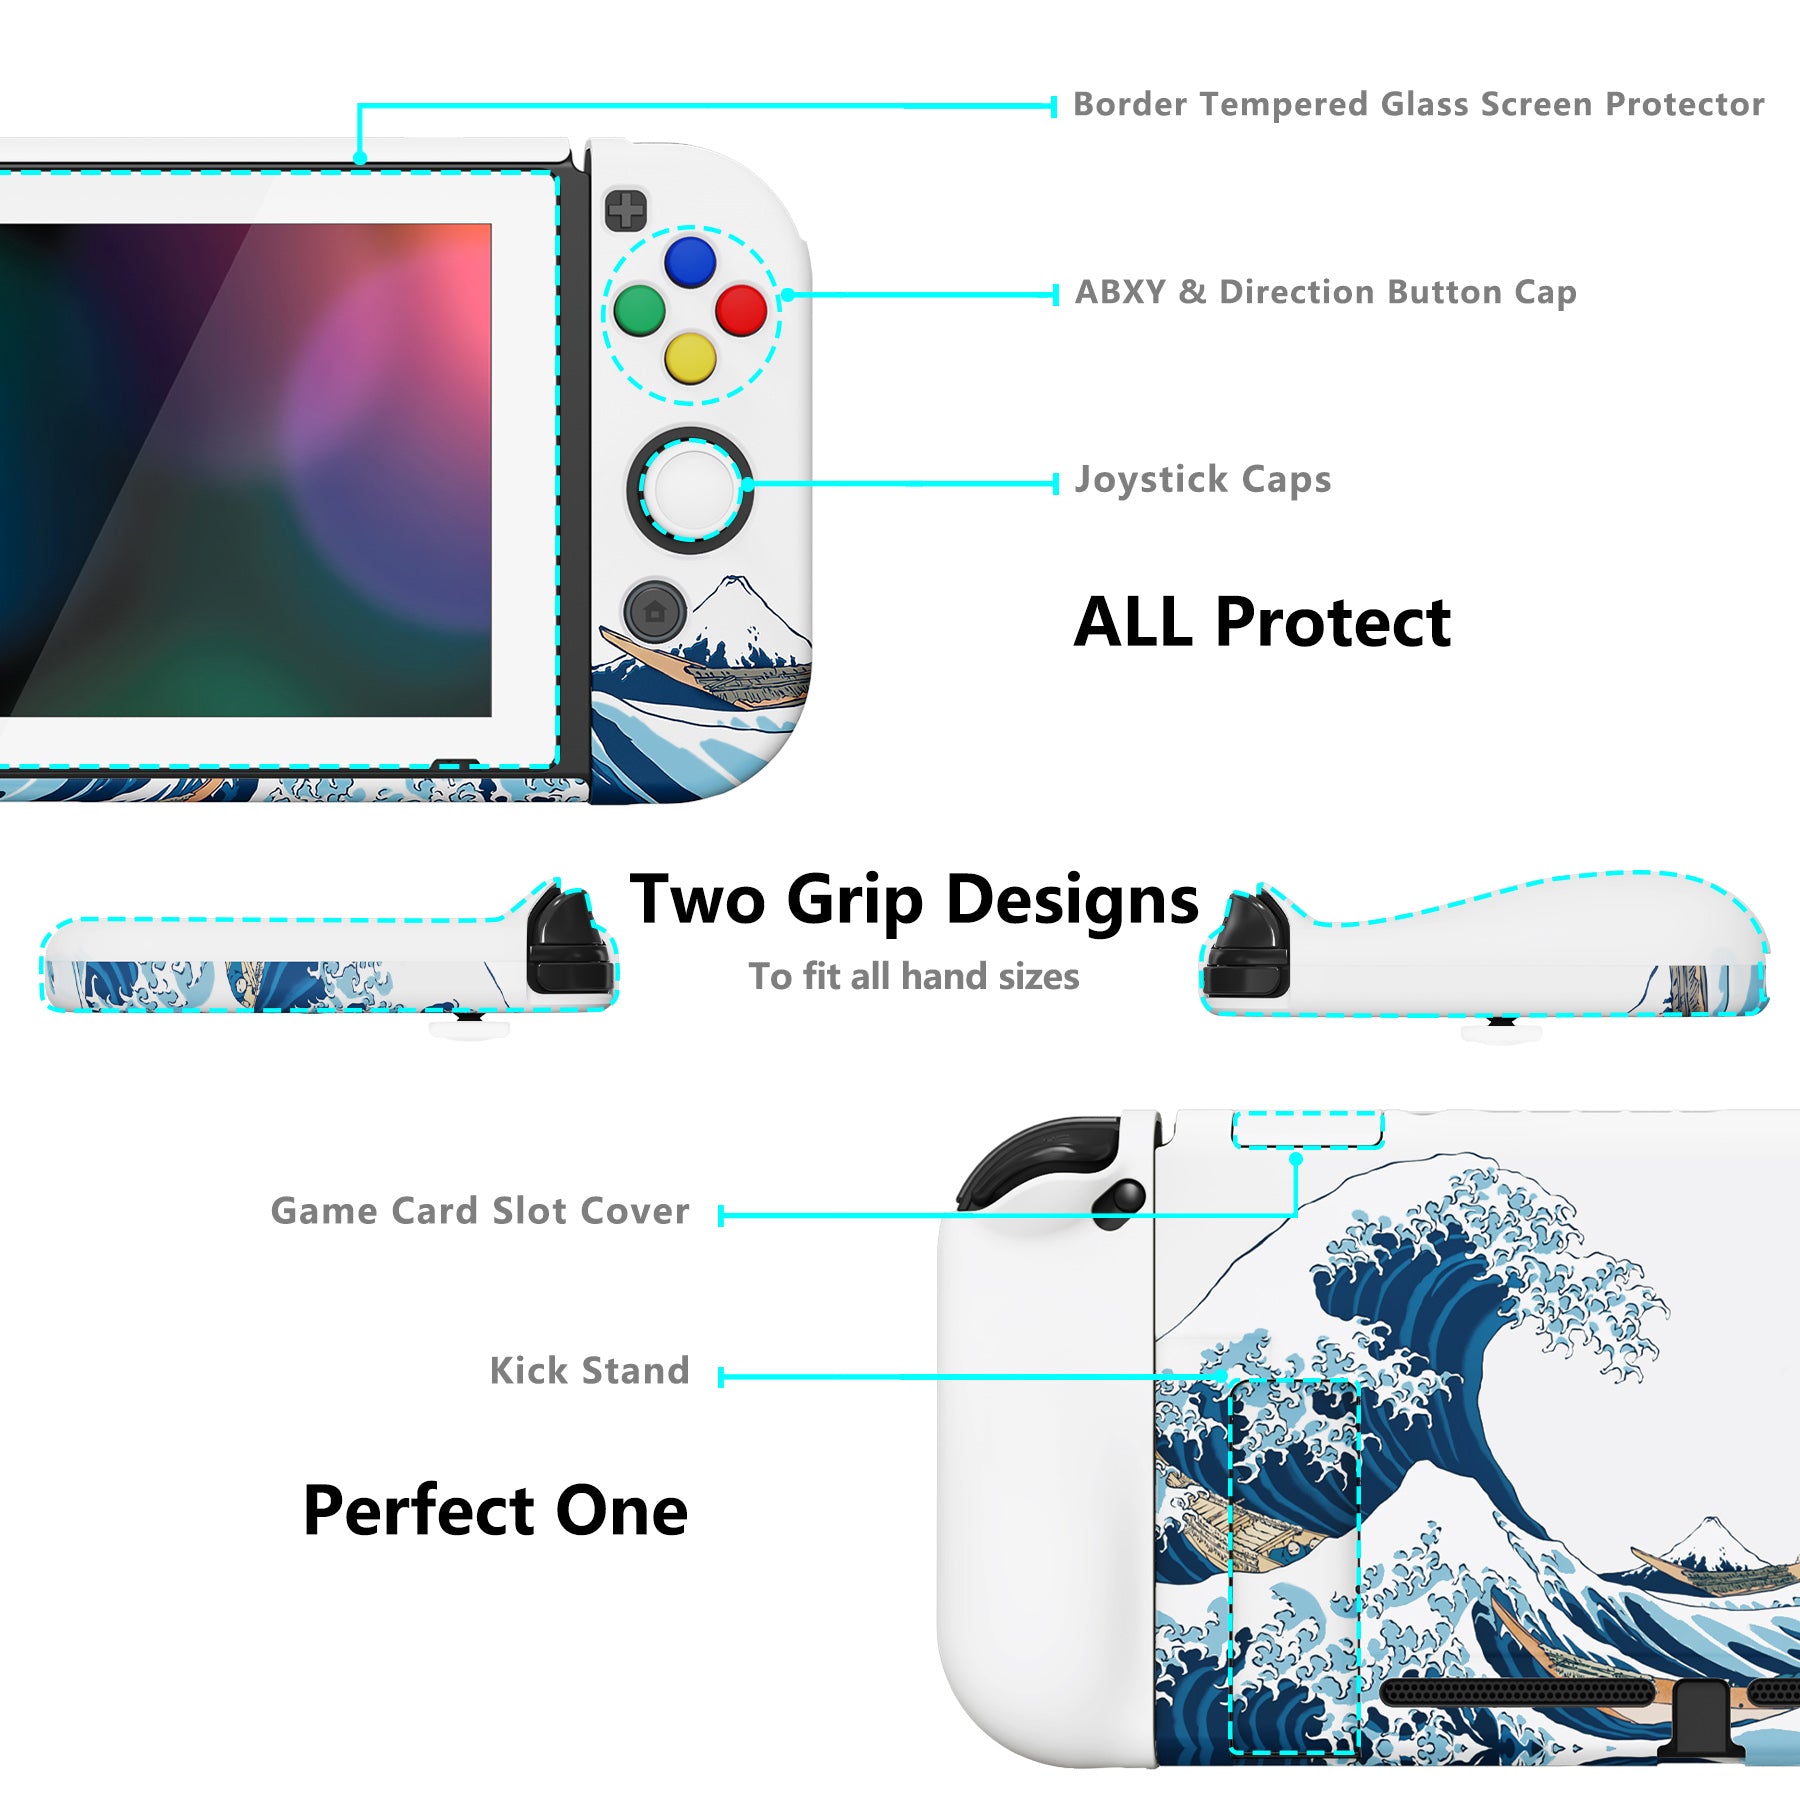 PlayVital AlterGrips Dockable Protective Case Ergonomic Grip Cover for Nintendo Switch, Interchangeable Joycon Cover w/Screen Protector & Thumb Grip Caps & Button Caps - The Great Wave off Kanagawa - TNSYT001 playvital